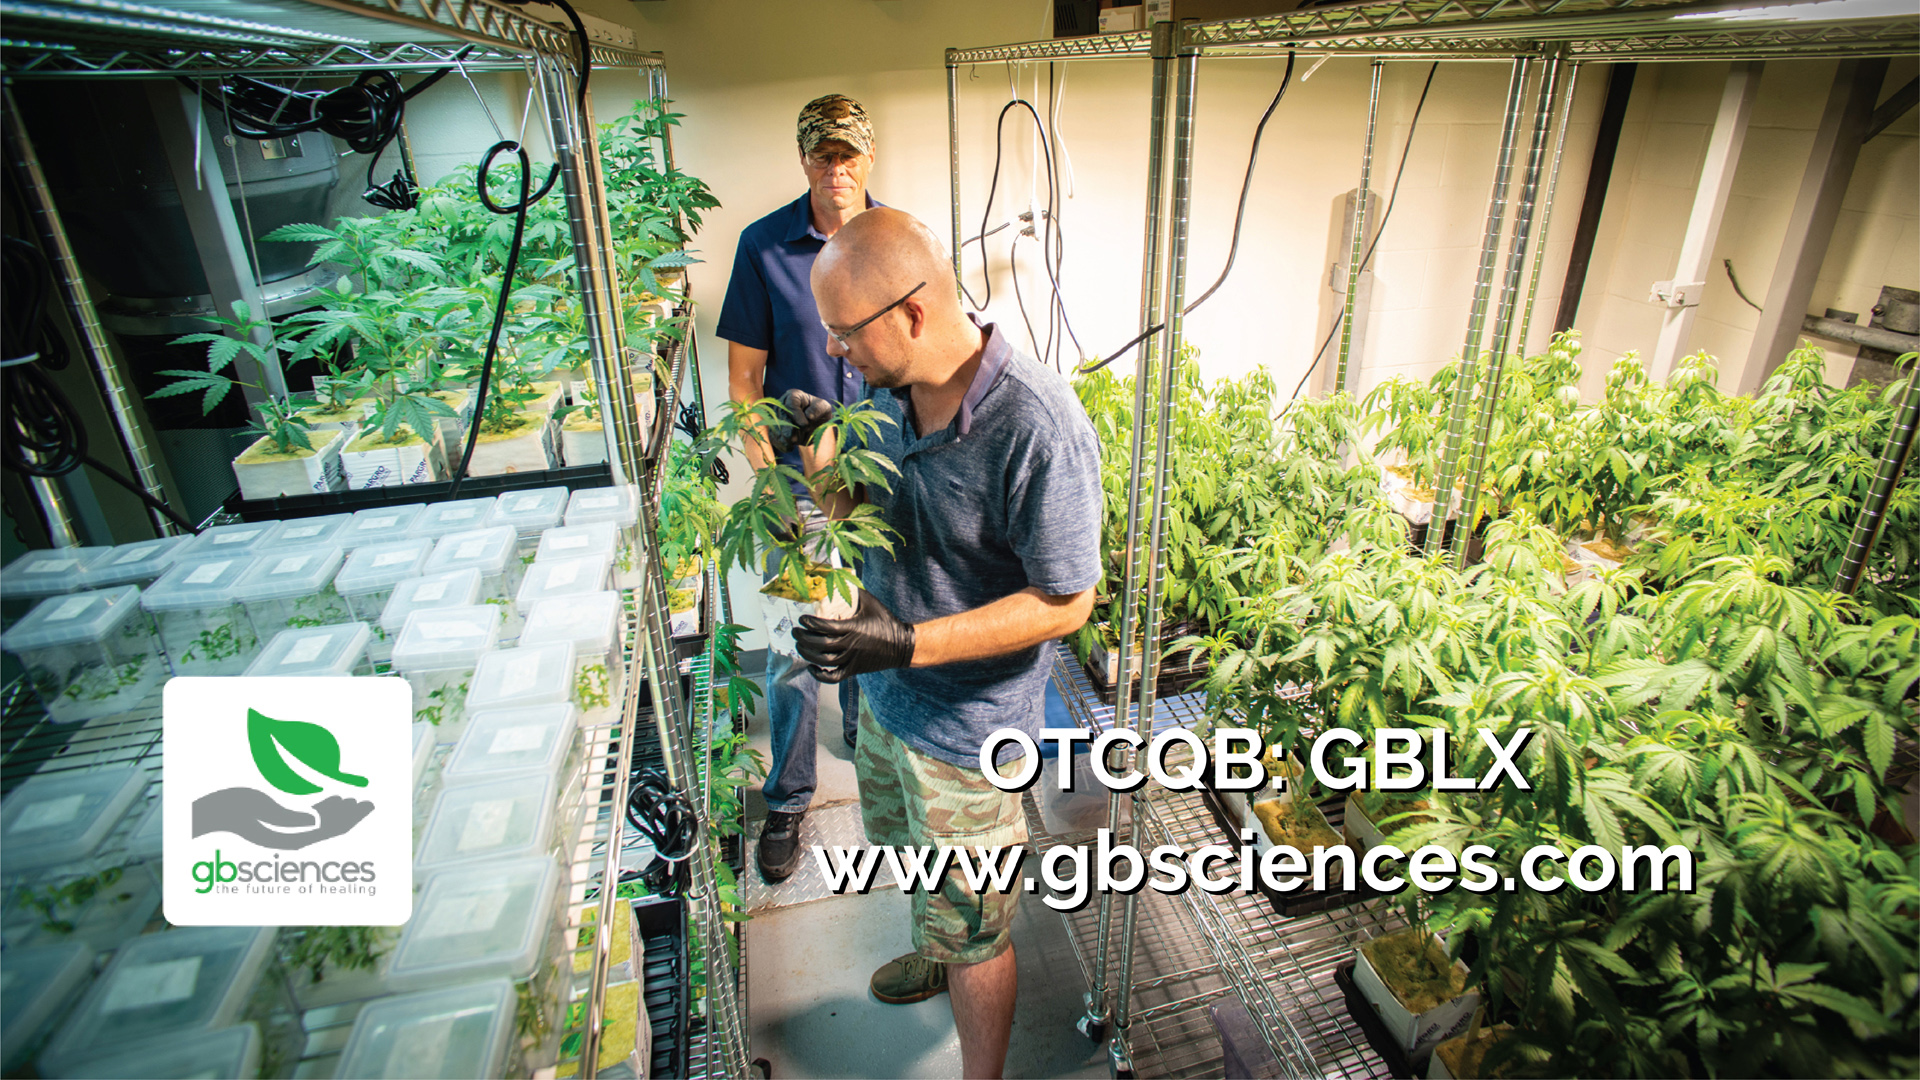 The LSU Ag Center and GB Sciences partnership matures.